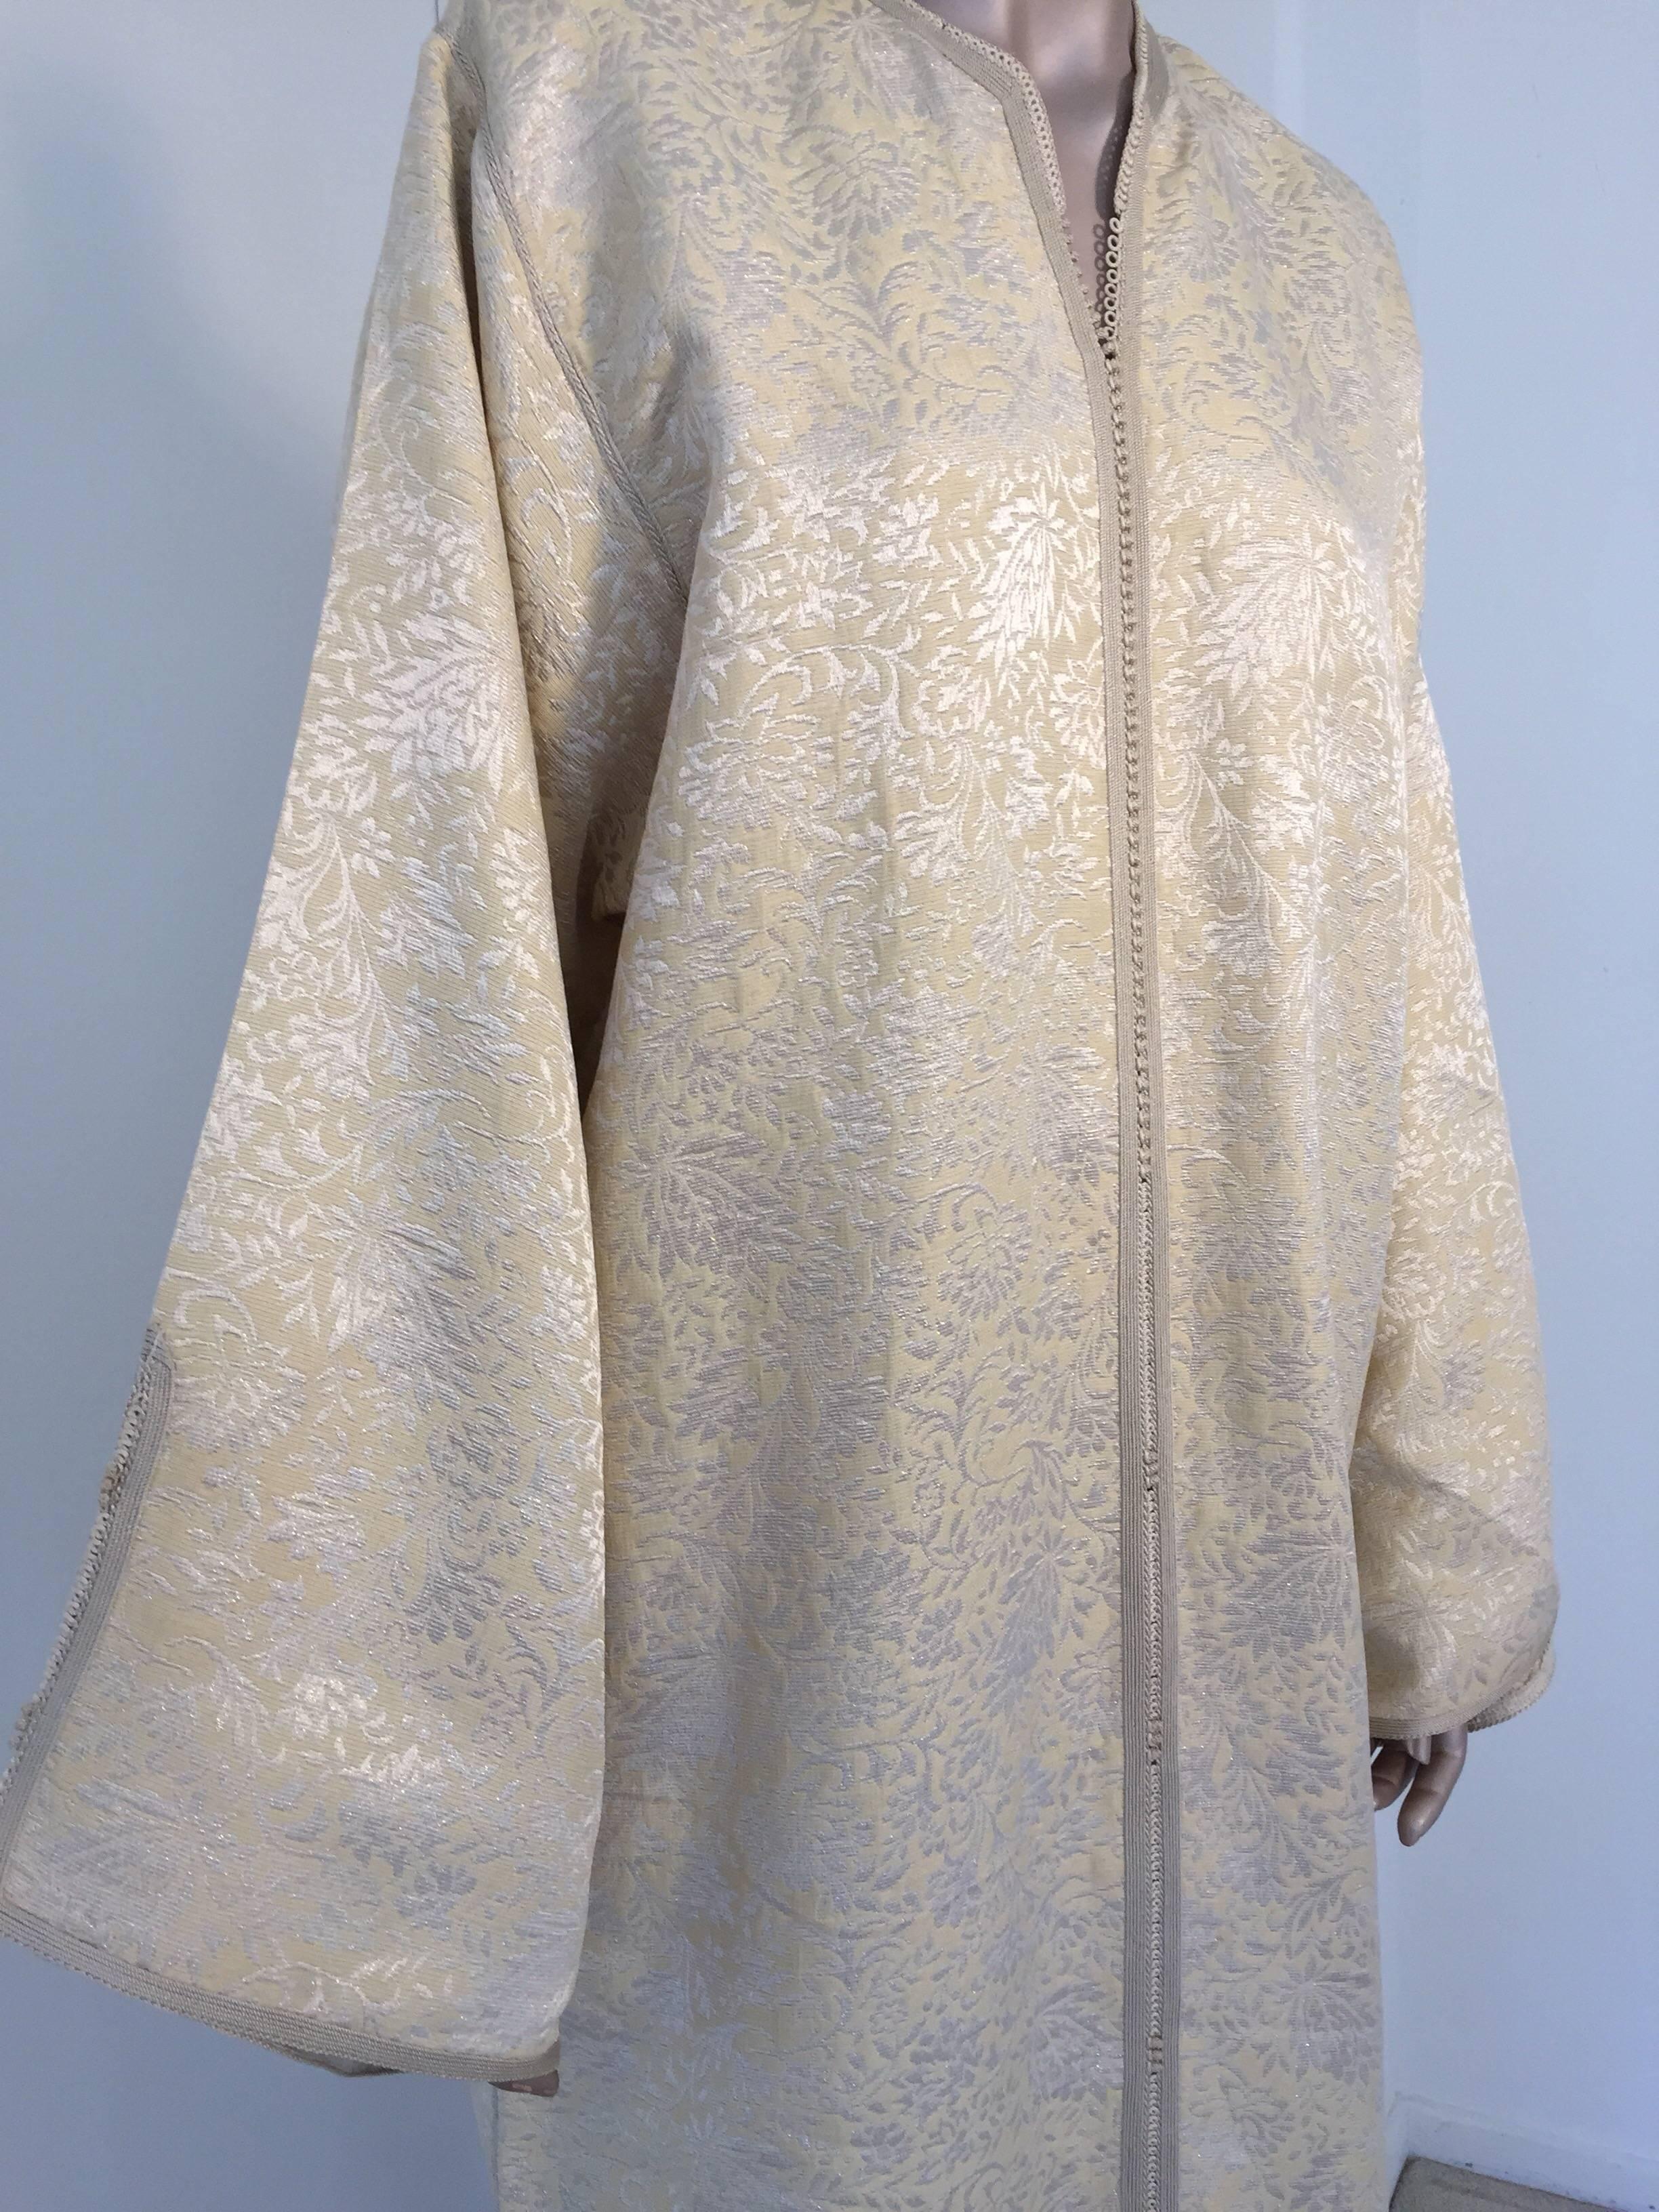 Hand-Crafted Moroccan Caftan from North Africa, Morocco, Vintage Gold Kaftan, 1970